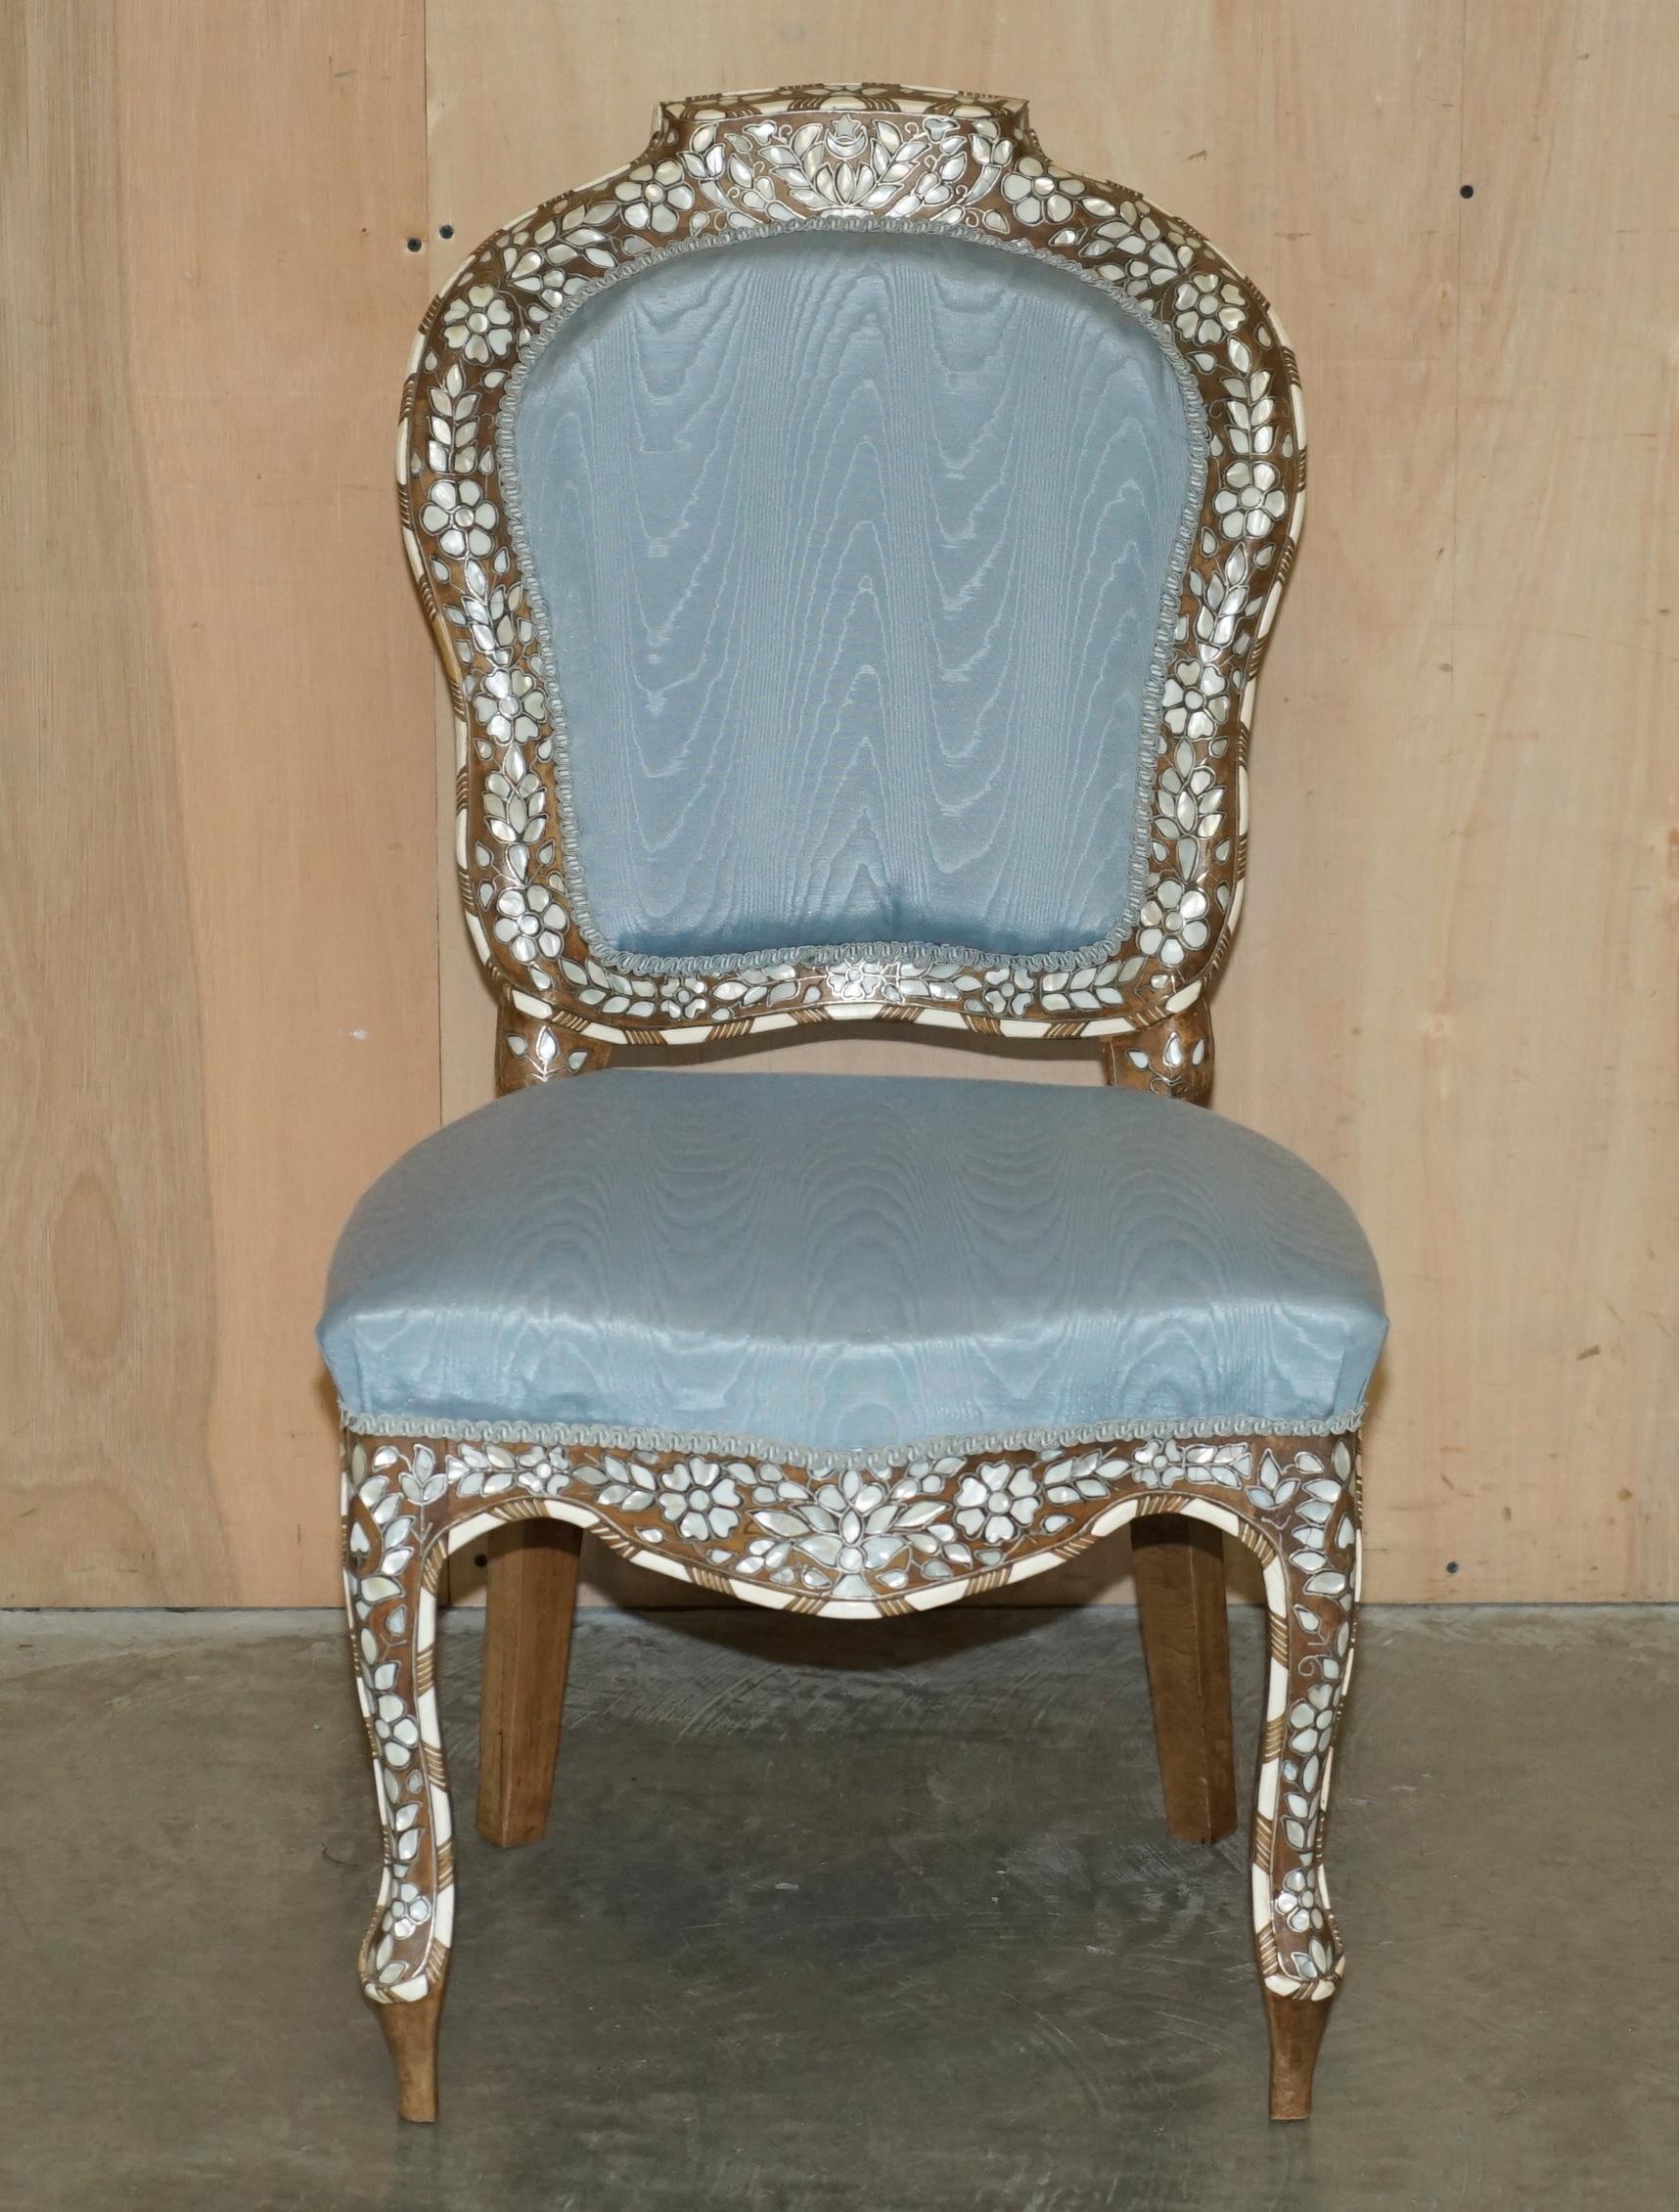 High Victorian SUBLiME PAIR OF ANTIQUE MOTHER OF PEARL INLAID SIDE CHAIRS WITH HARDWOOD FRAMES For Sale